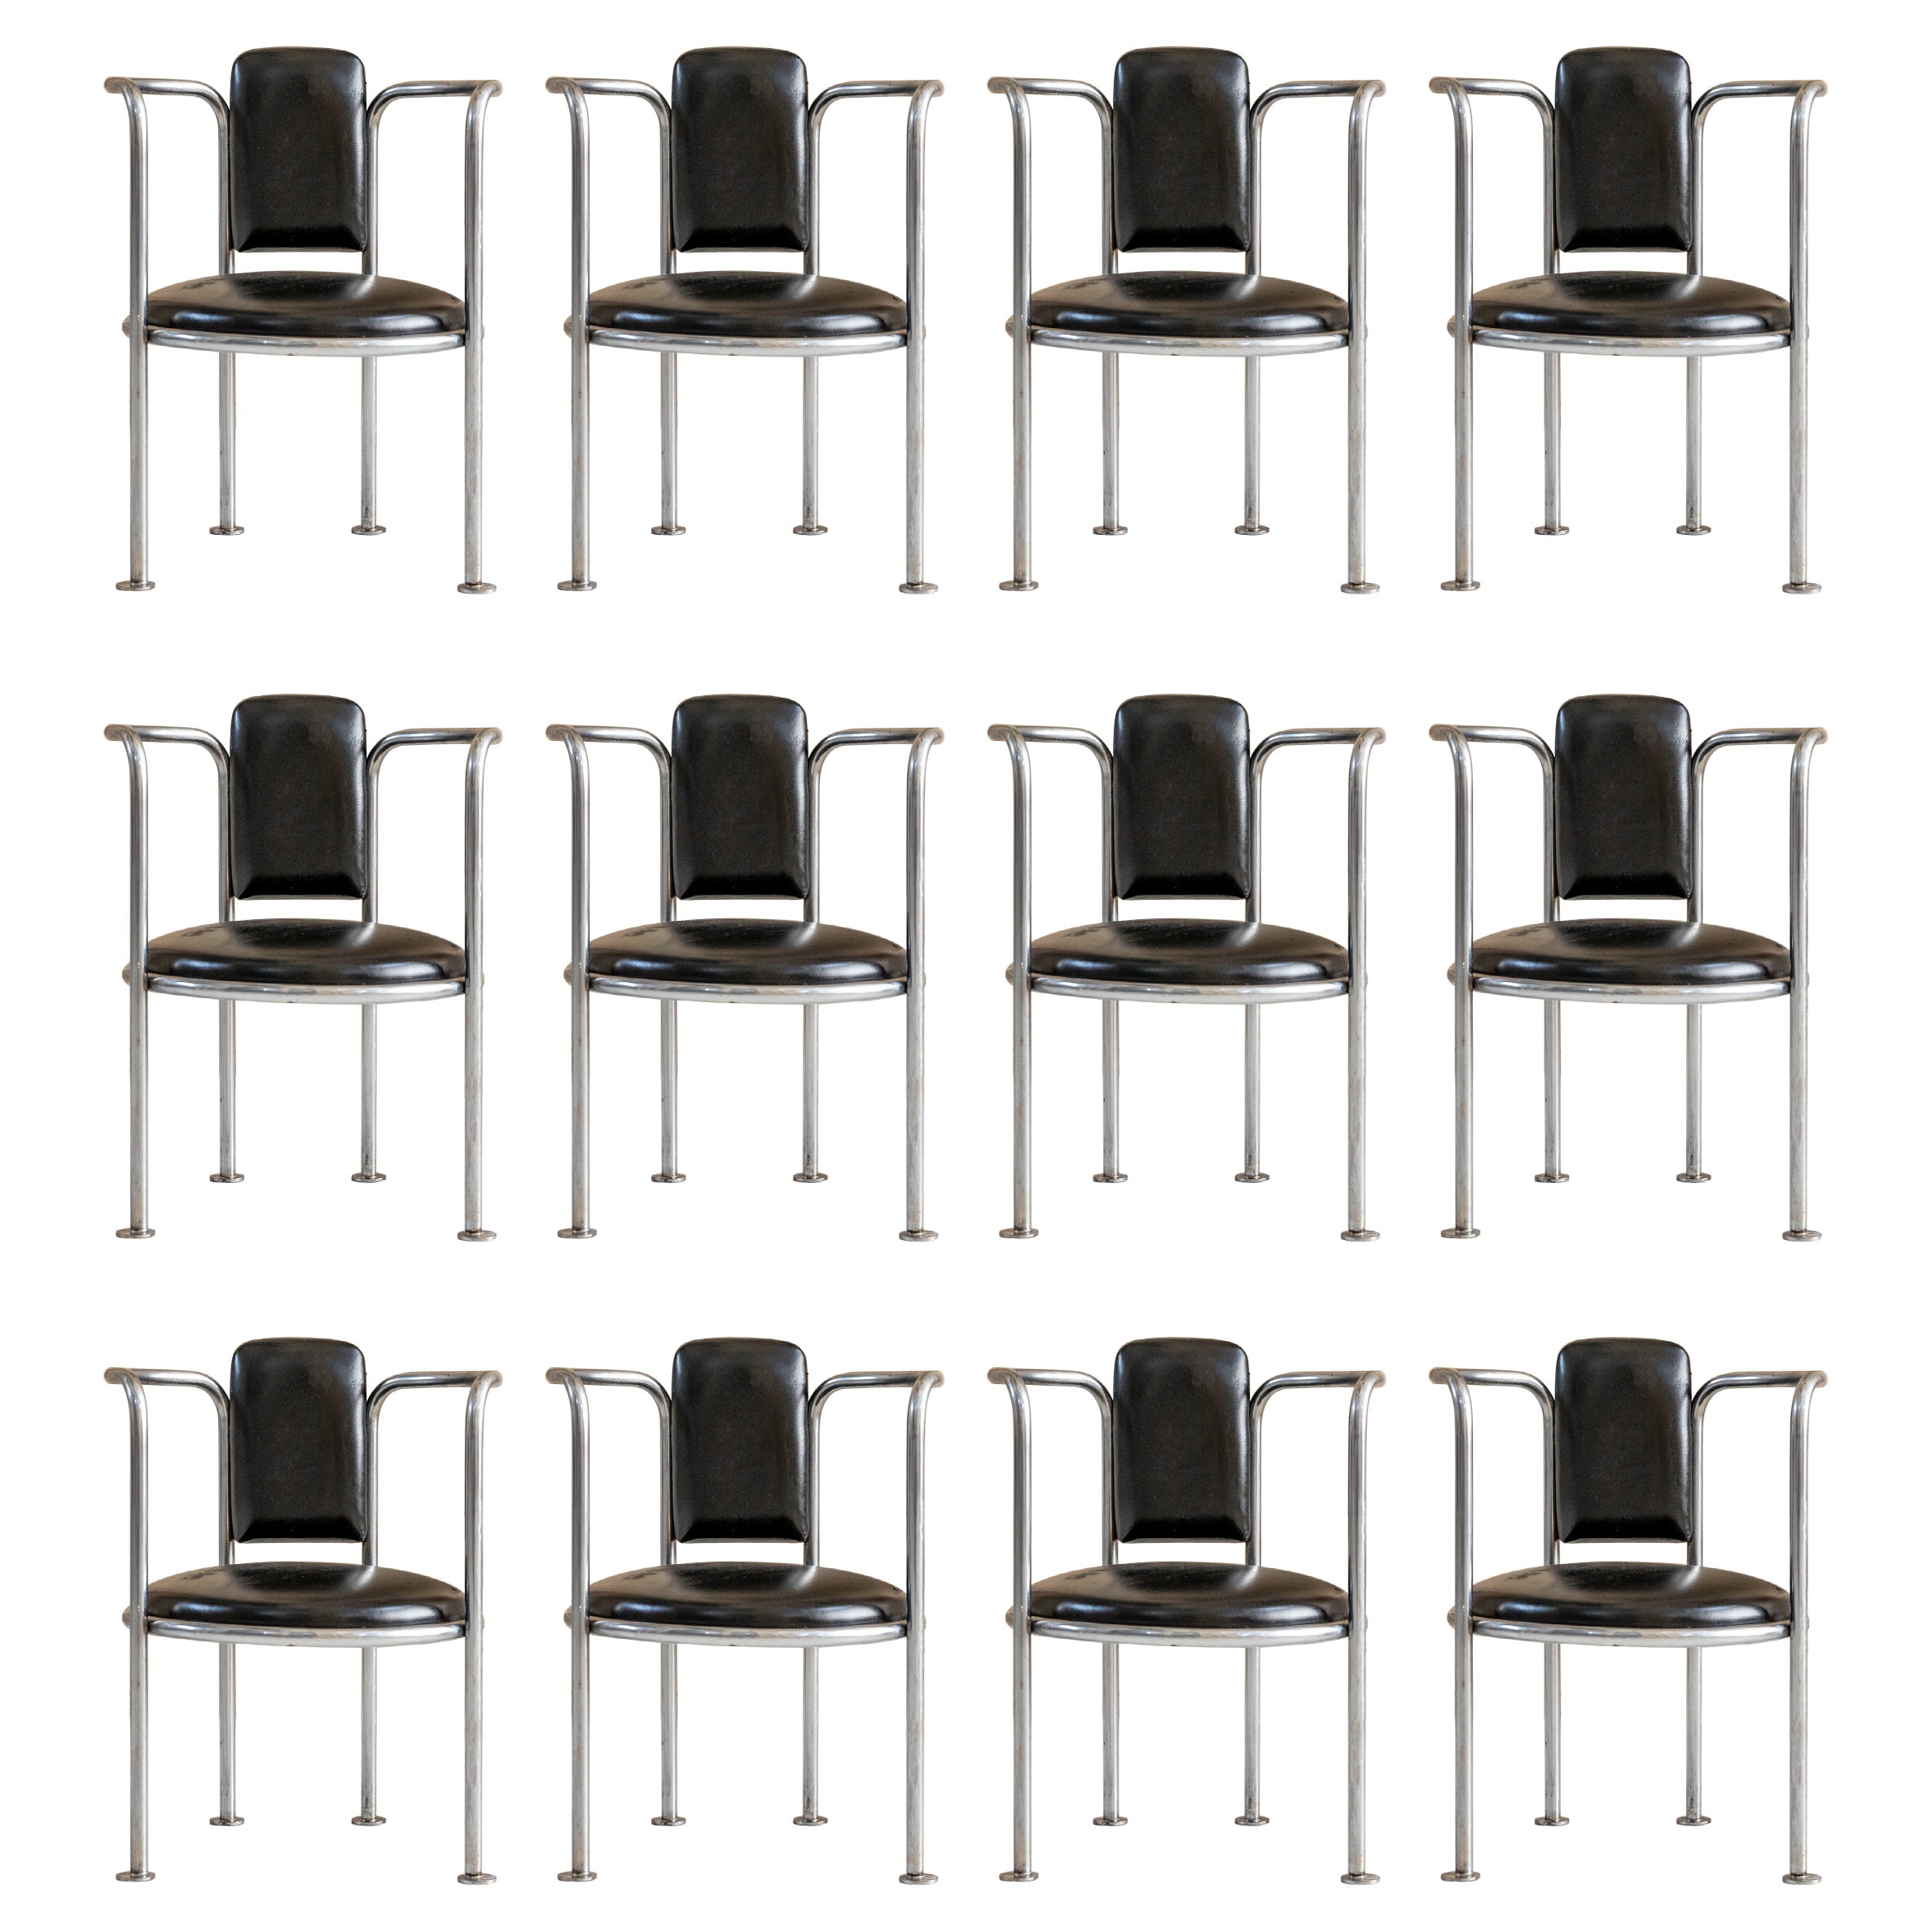 Set of 12 Chairs Bohaus Inspired